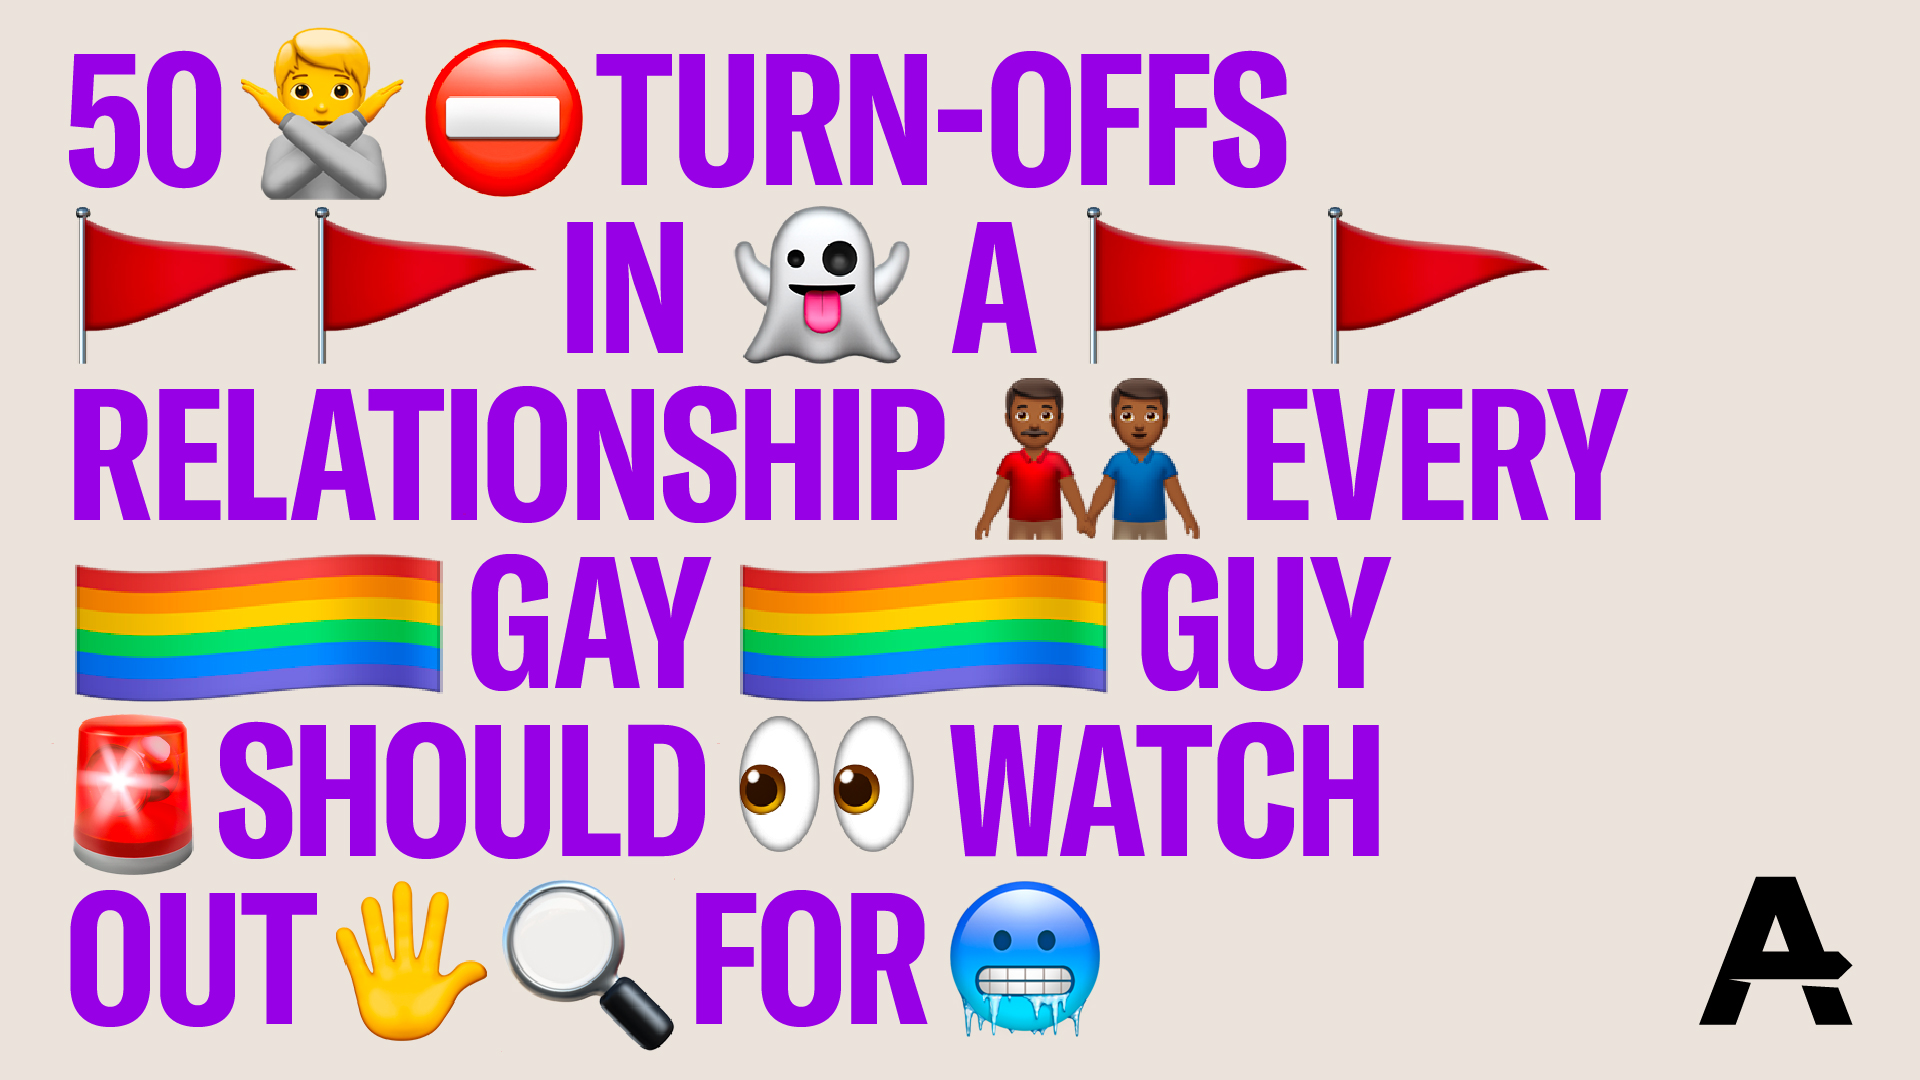 50 TURN-OFFS IN A RELATIONSHIP EVERY GAY GUY SHOULD WATCH OUT FOR   He’s all yours. But he comes with some surprises.